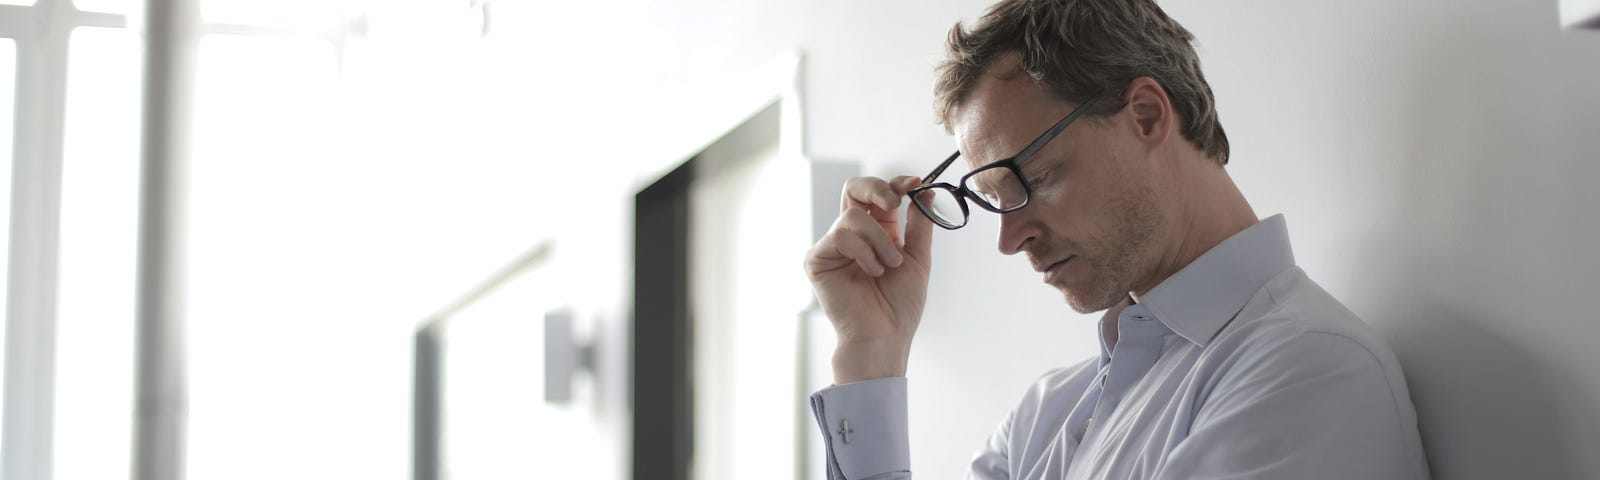 Man in dress shirt leans up against wall with eyes closed and removes eyeglasses.